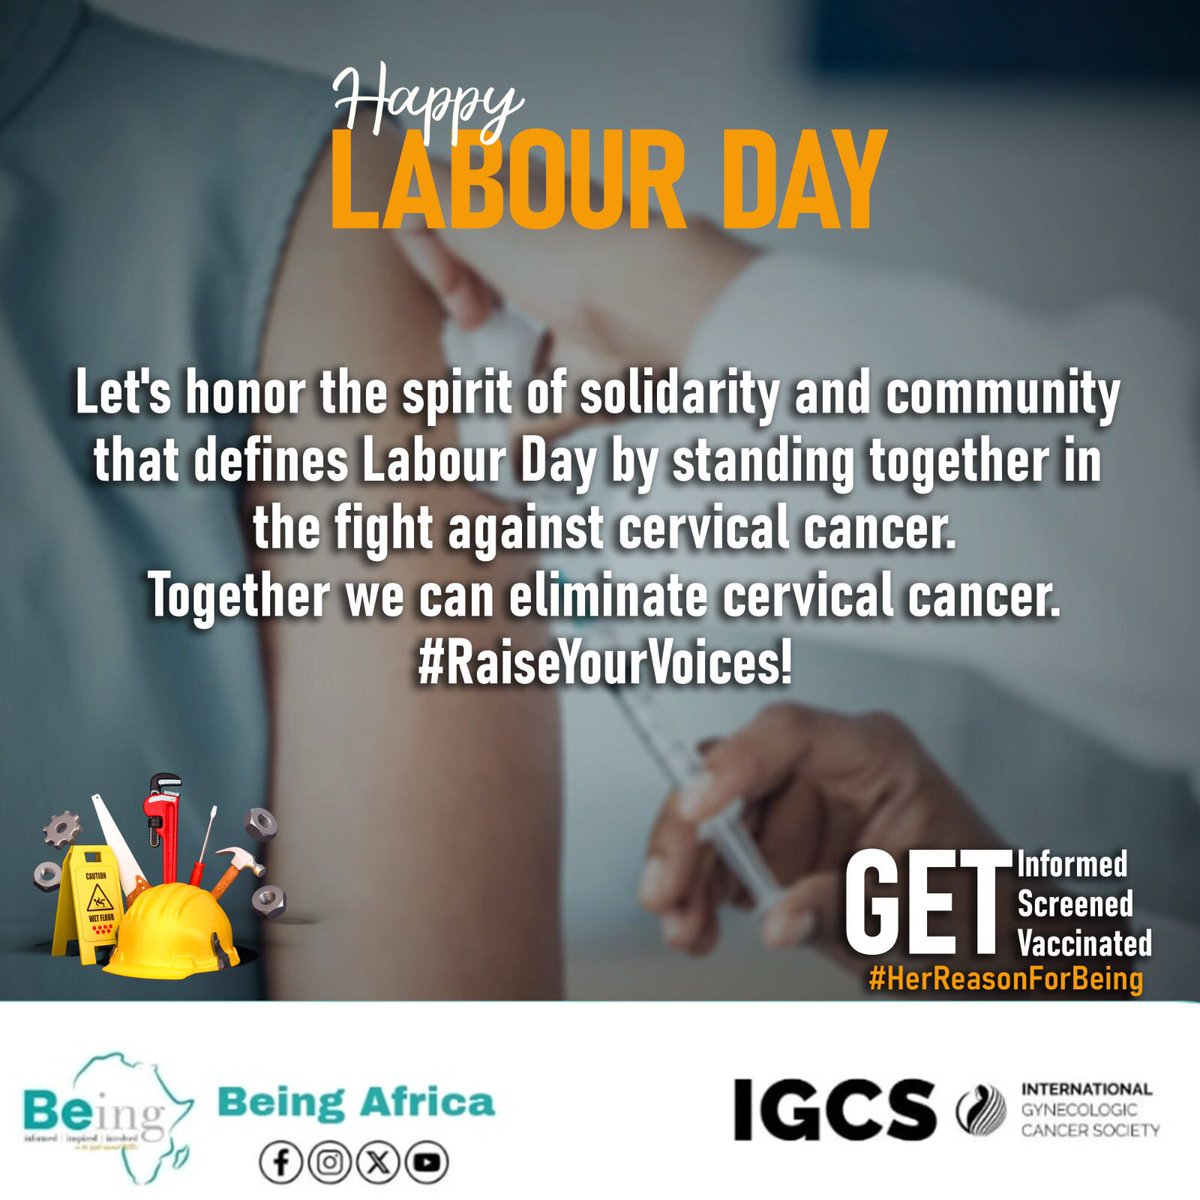 On this Labor Day, we salute those tirelessly fighting against cervical cancer, raising awareness, providing care, and supporting patients. Your dedication inspires us all. Together, let's continue the fight! 💪 #HerReasonForBeing #LaborDay2024 #EndCervicalCancer 

@IGCSociety